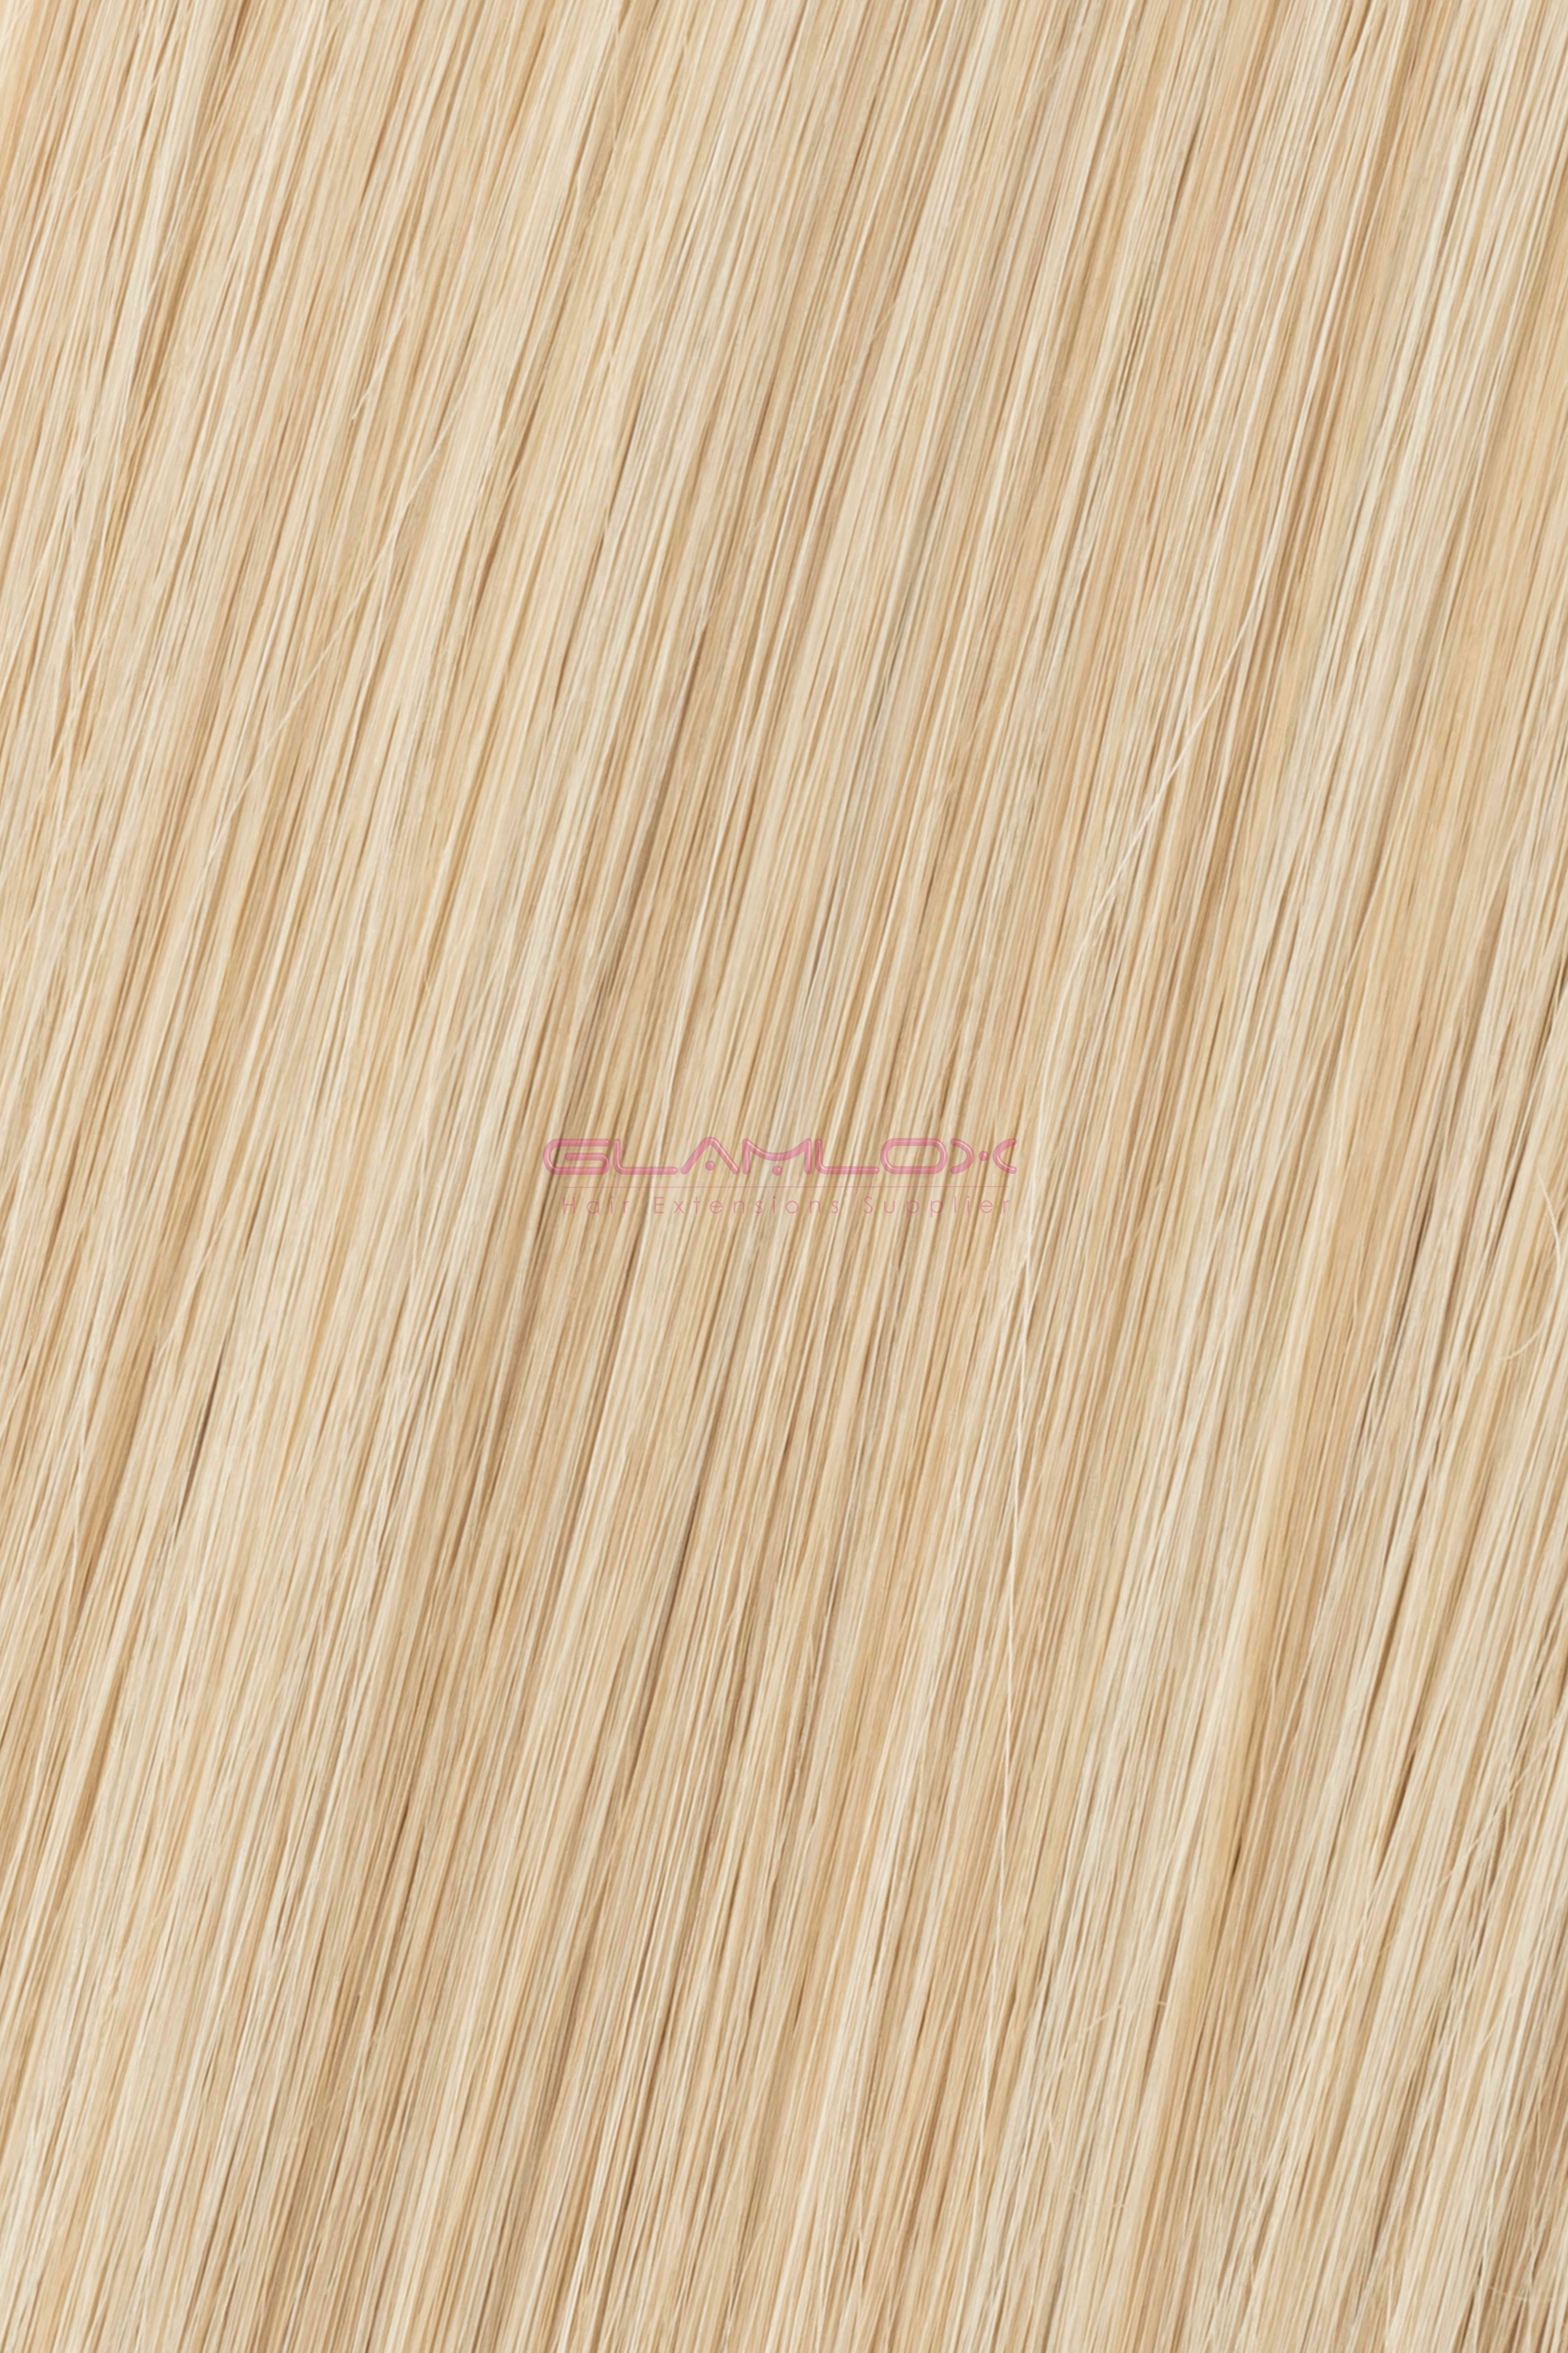 20" Pre-Bonded - Russian Mongolian Double Drawn Remy Human Hair - 100 Strands